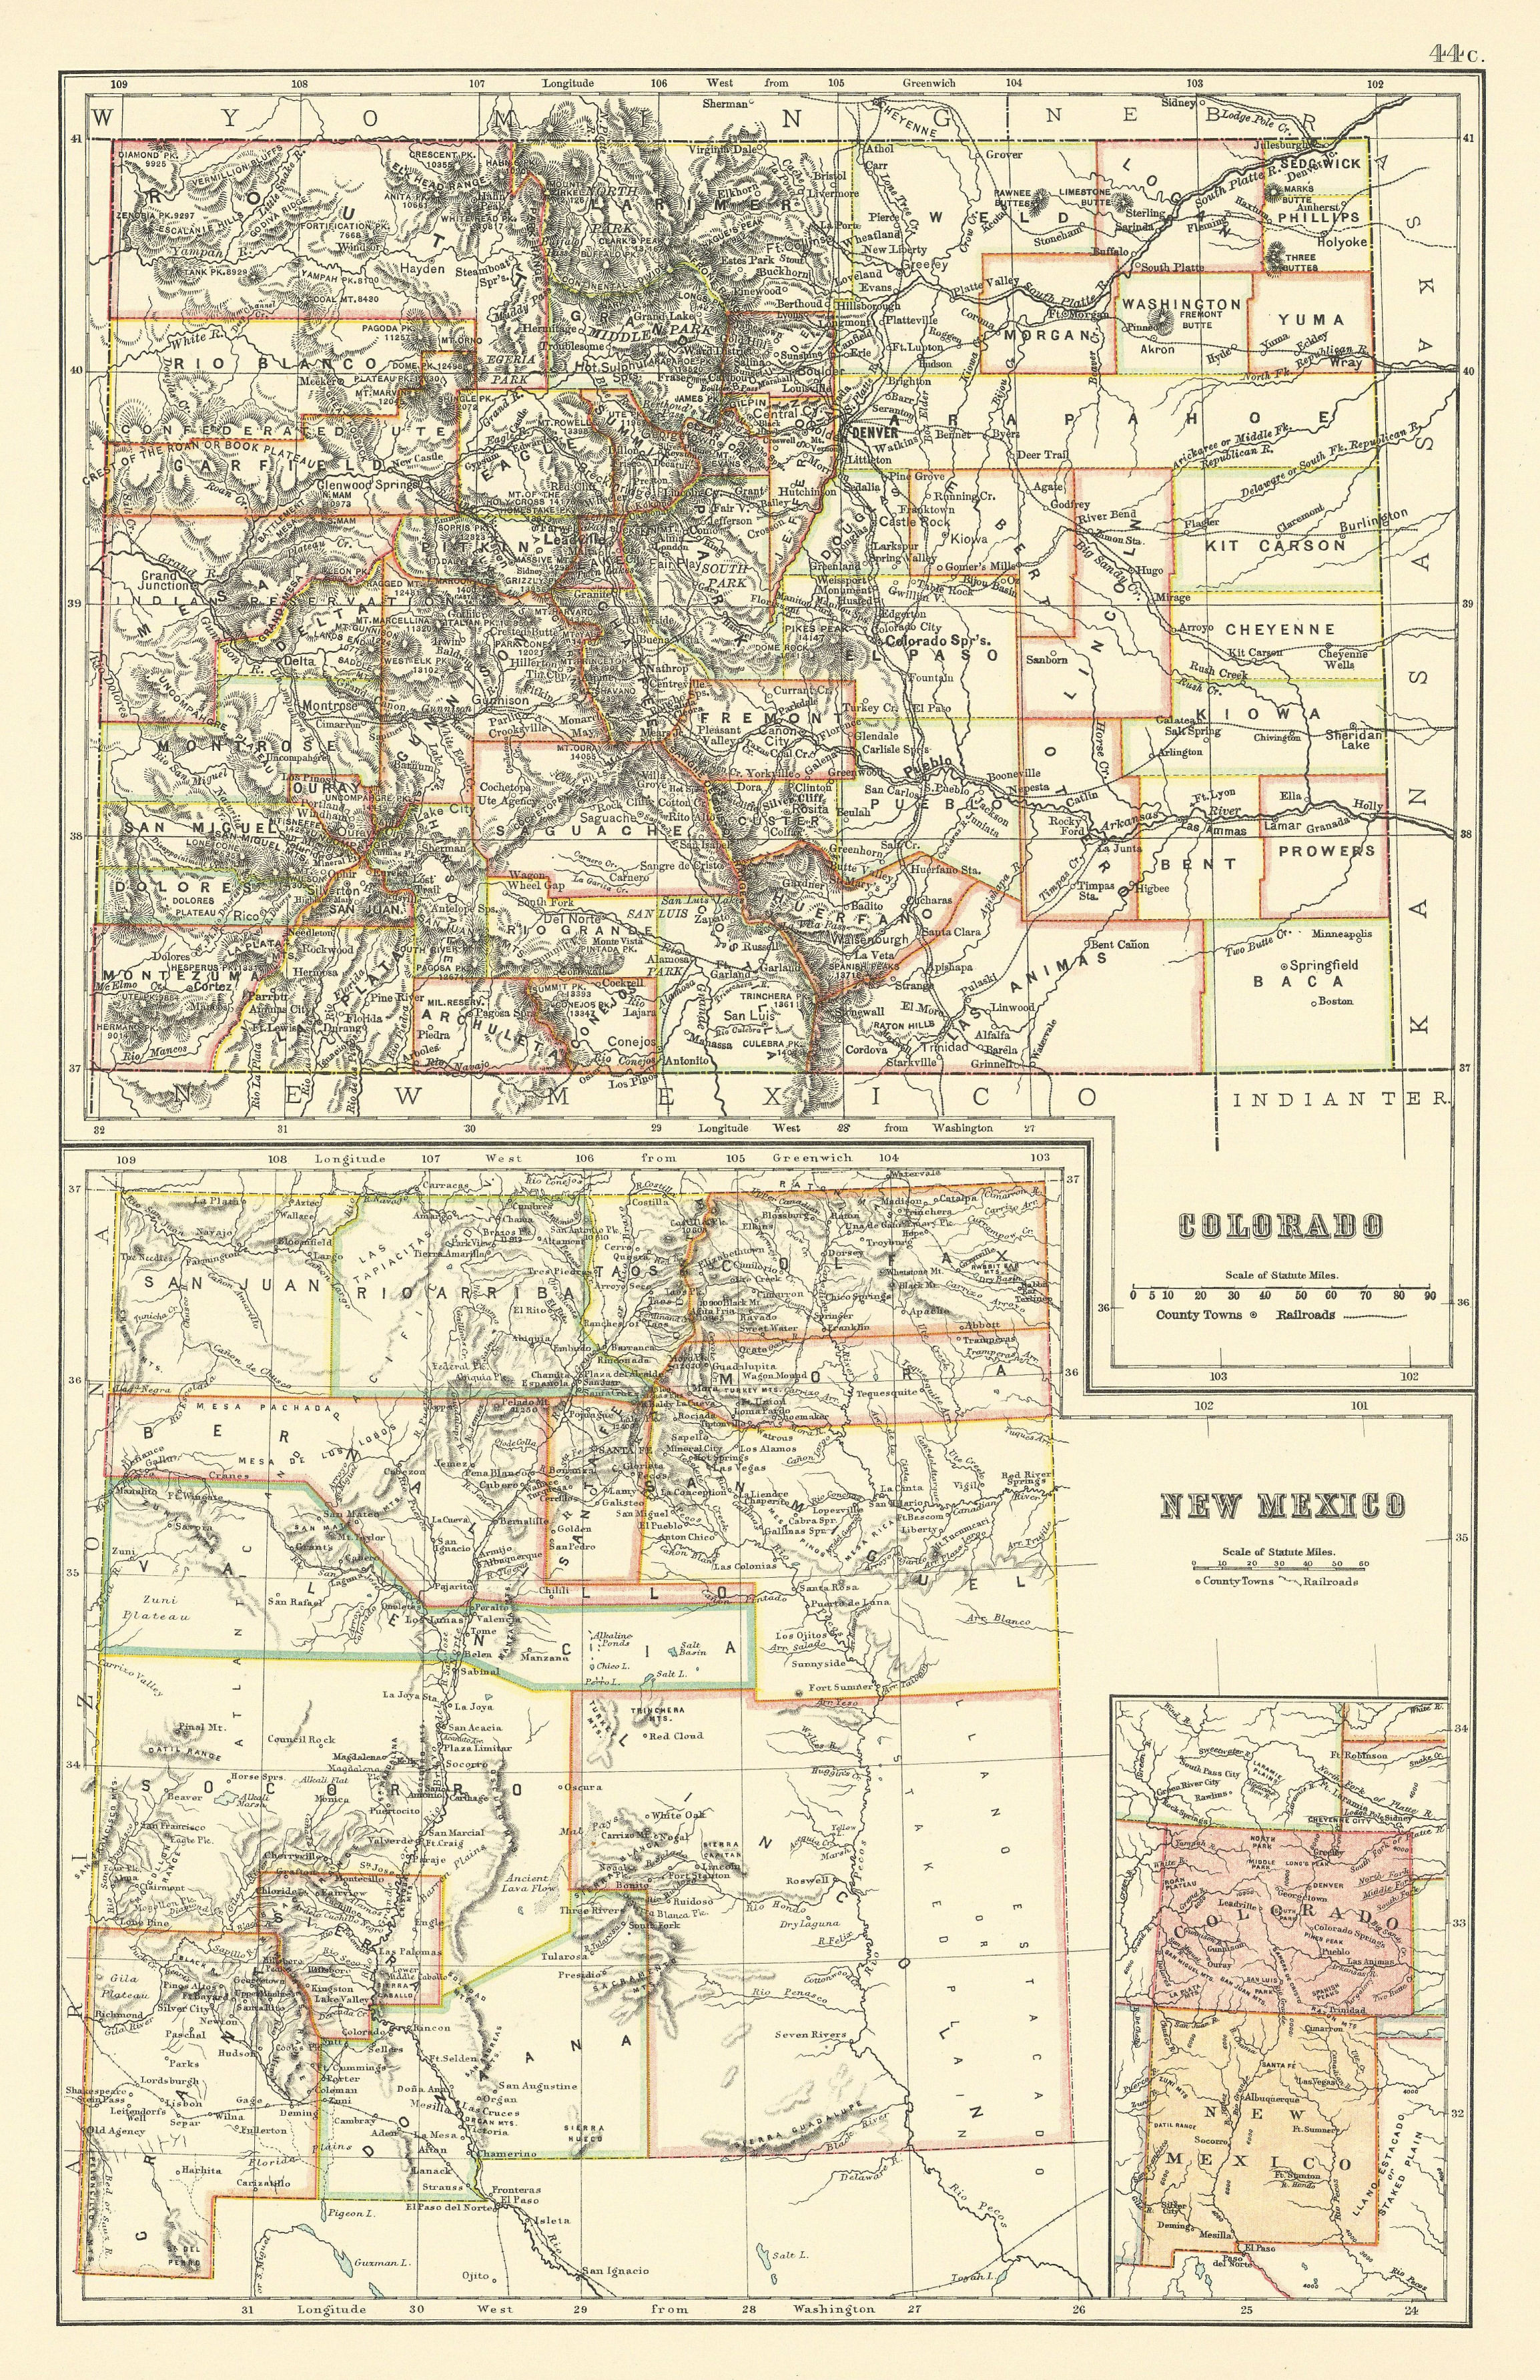 Associate Product Colorado and New Mexico state maps showing counties. BARTHOLOMEW 1898 old